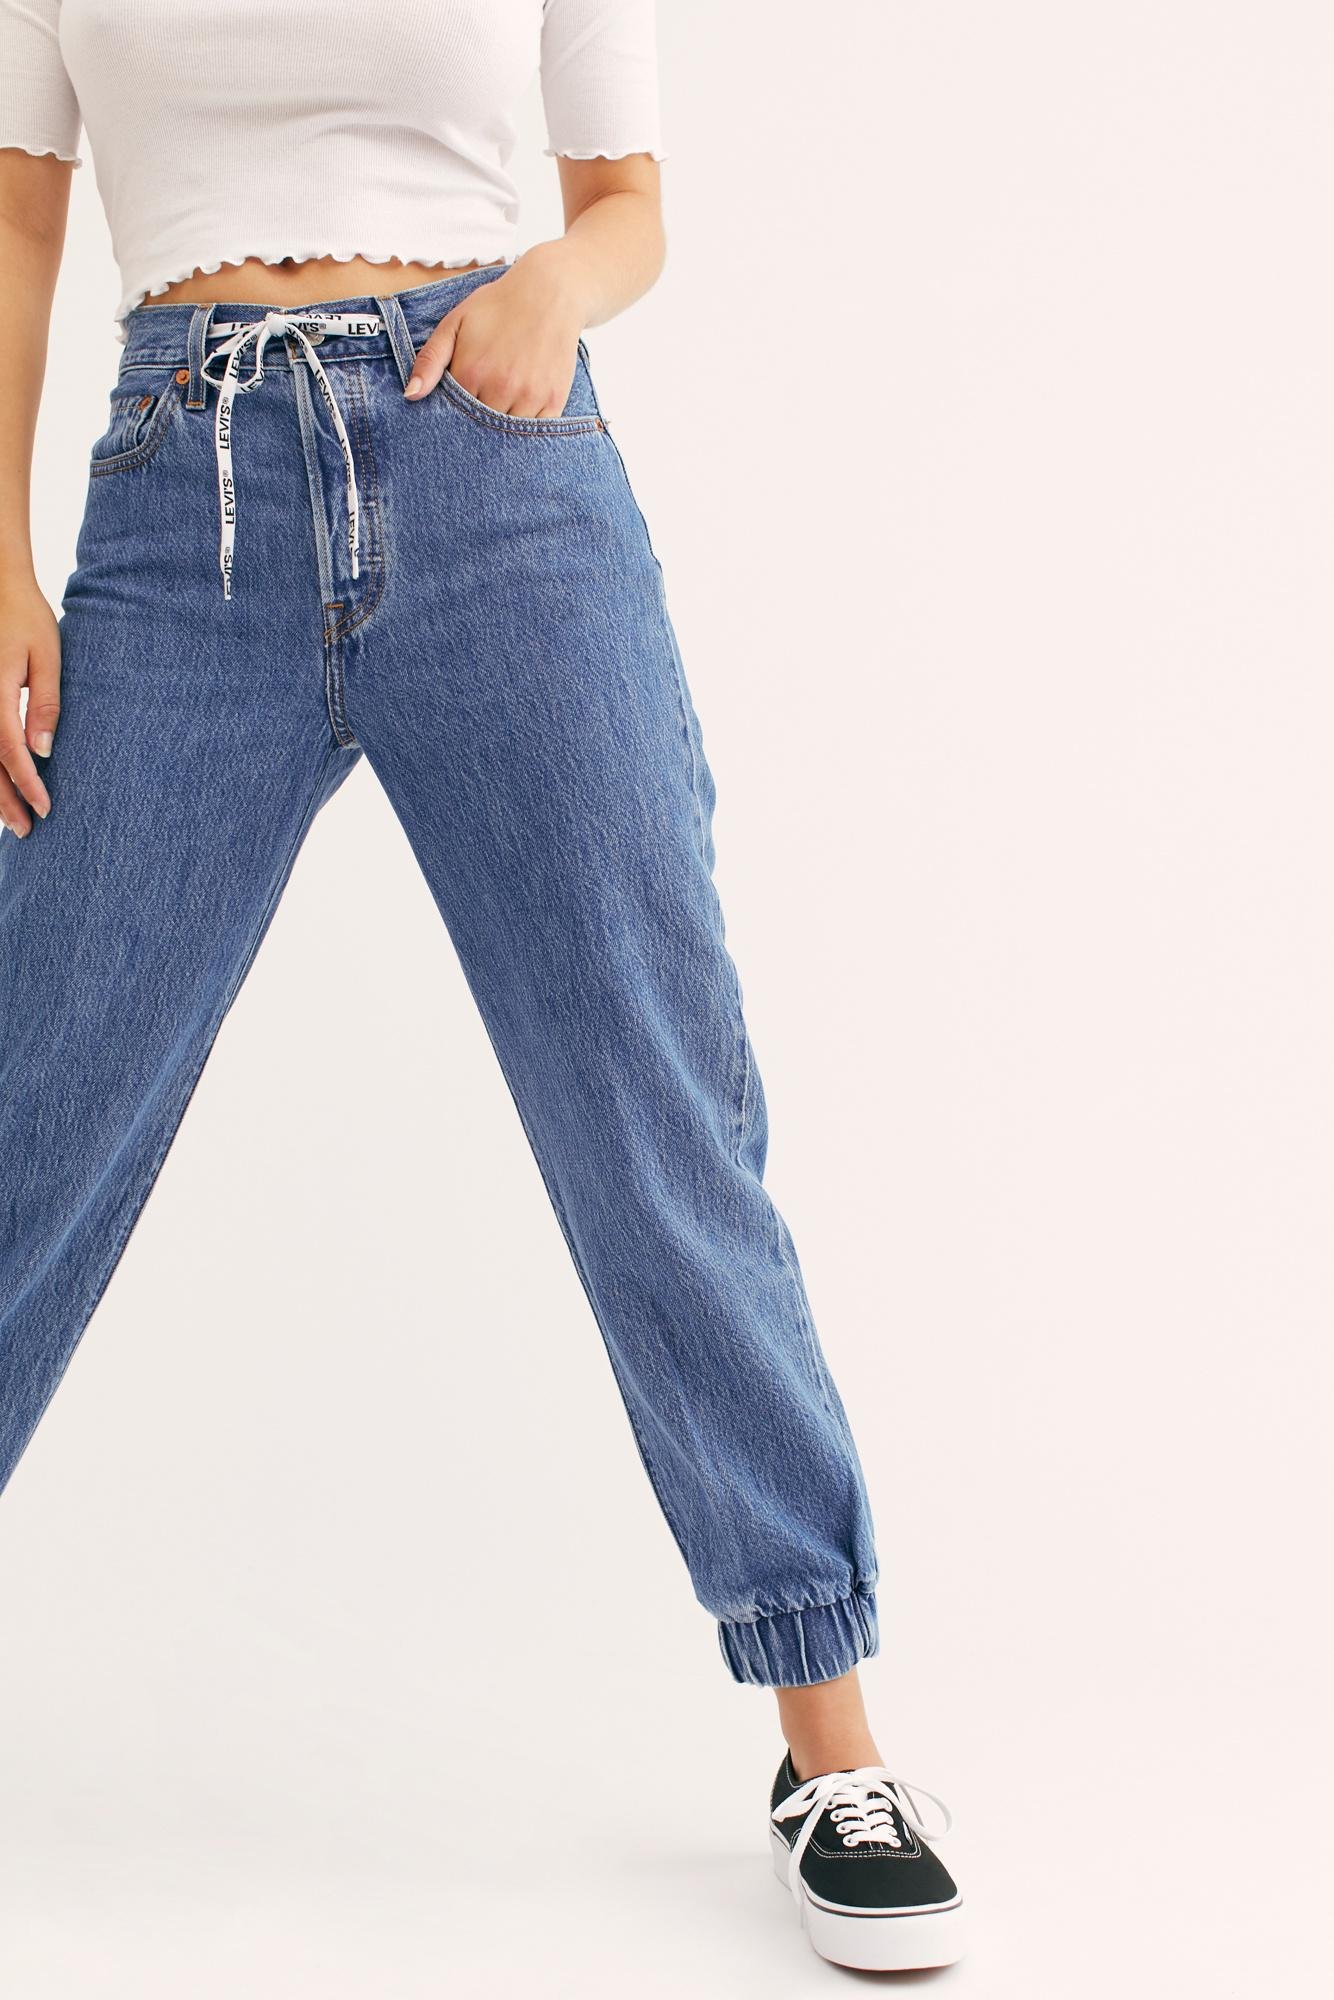 Free People Denim Levi's 501 Jogger Jeans By Levi's in Blue - Lyst